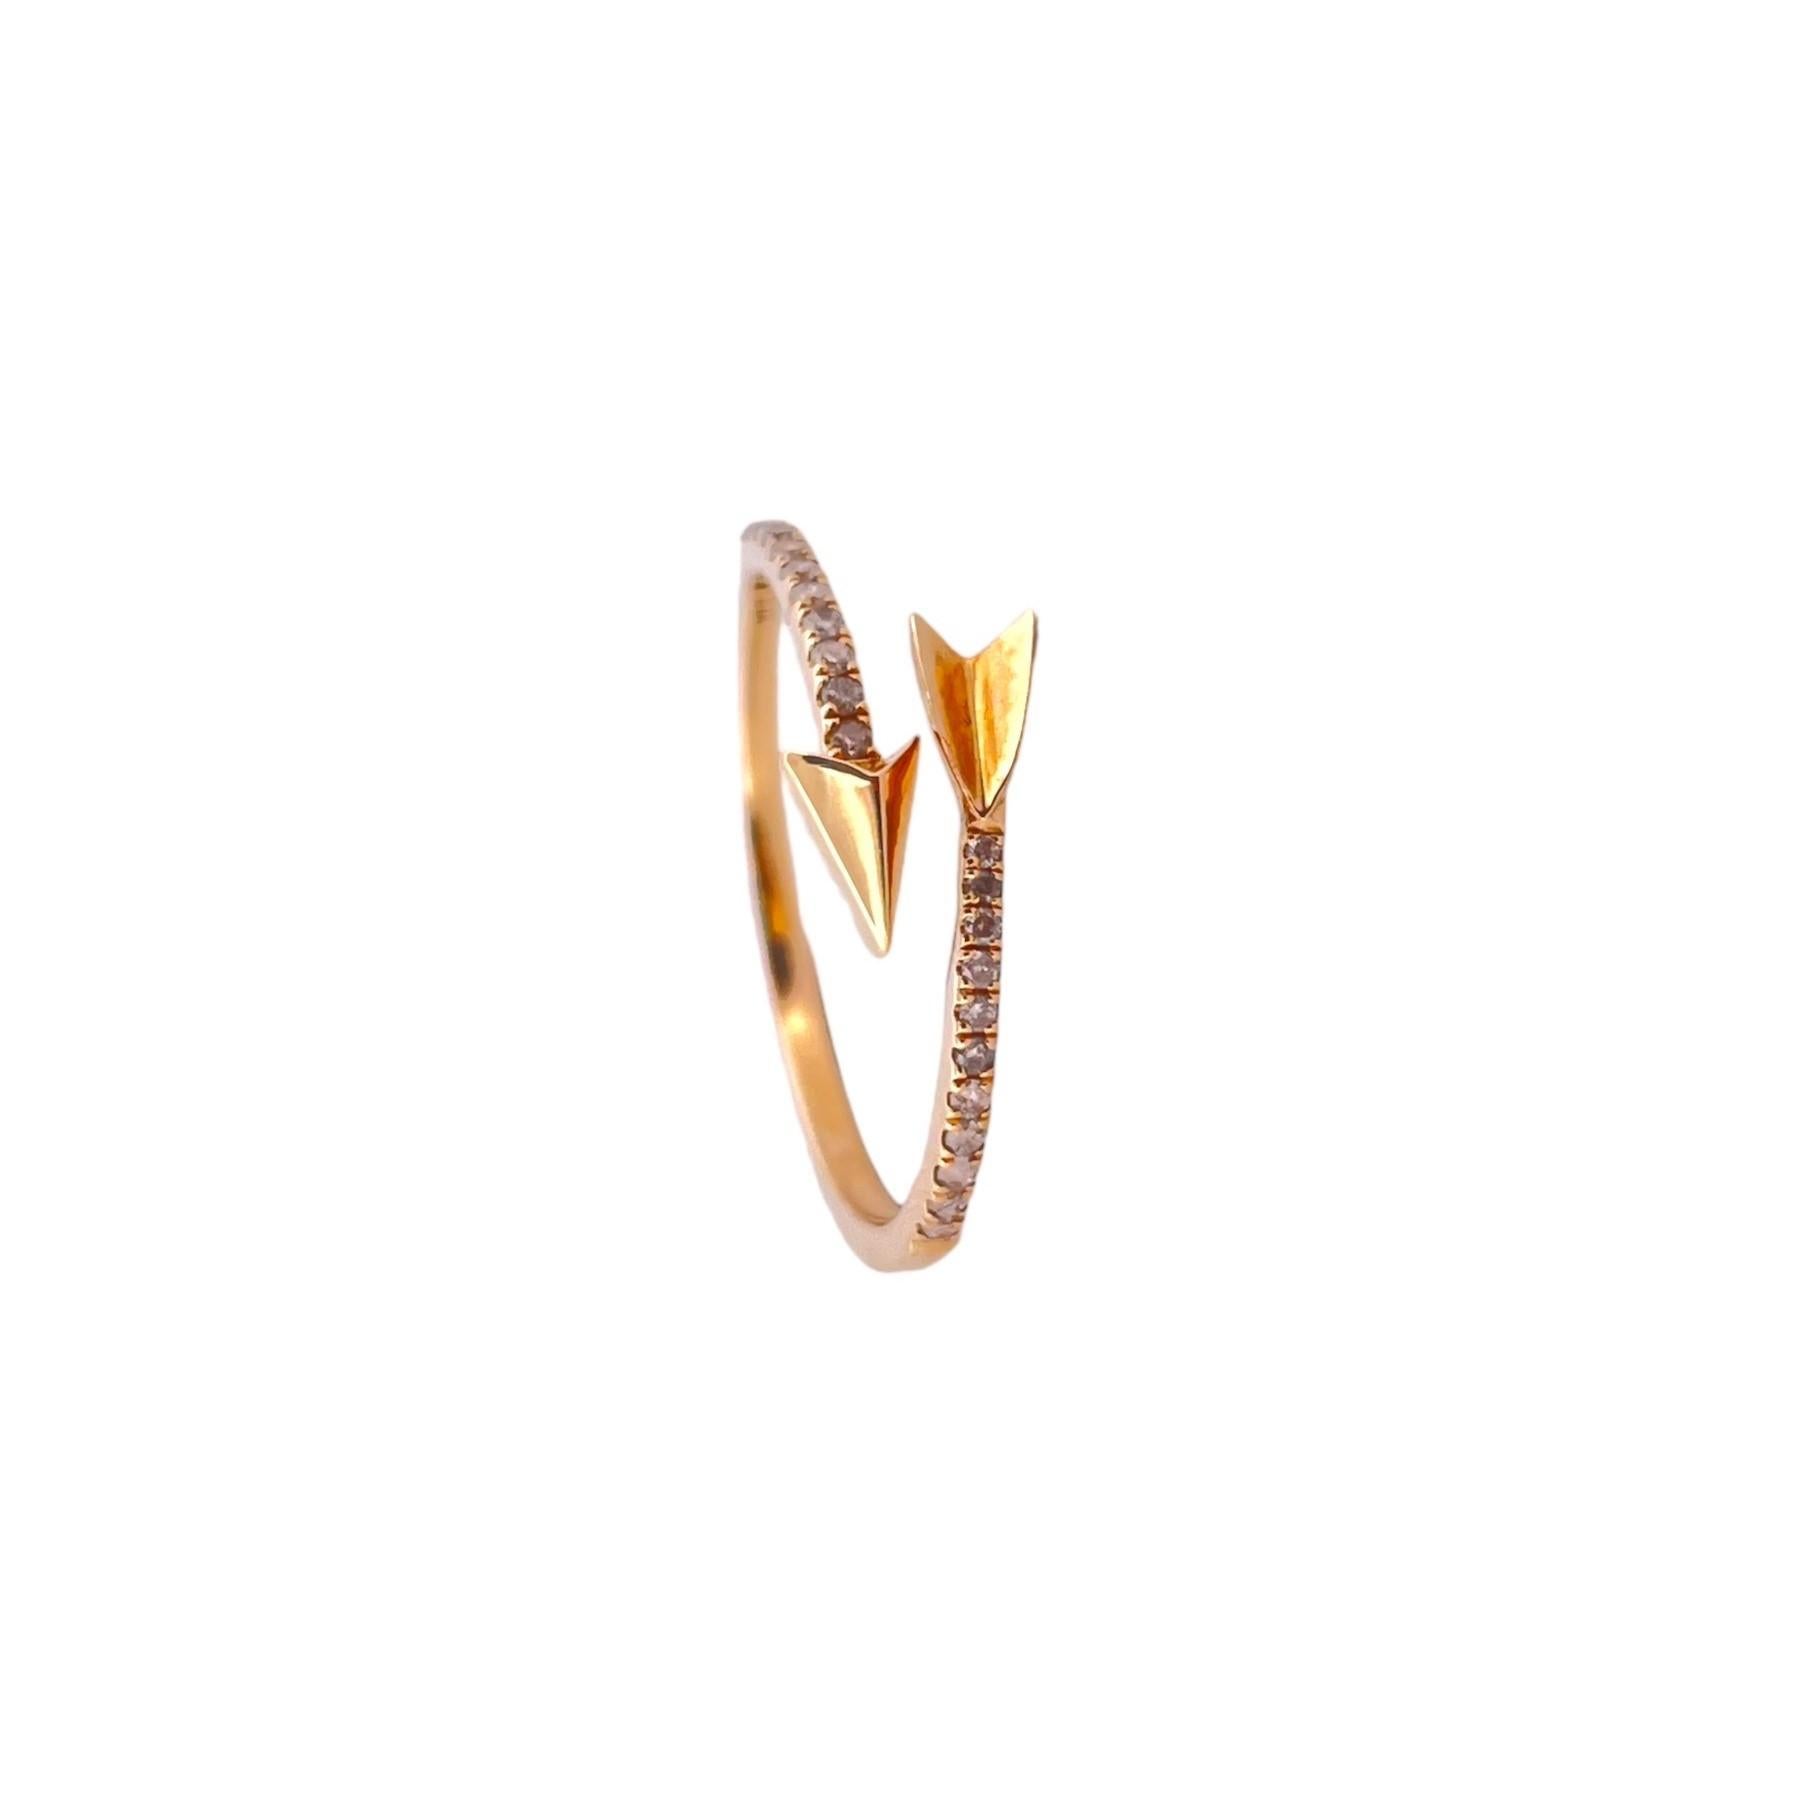 Embrace the symbol of direction and purpose with our Arrow Diamond Ring, a beautifully crafted piece that combines the elegance of diamonds with the warmth of 14K yellow gold. This exquisite ring features a delicate arrow design adorned with a